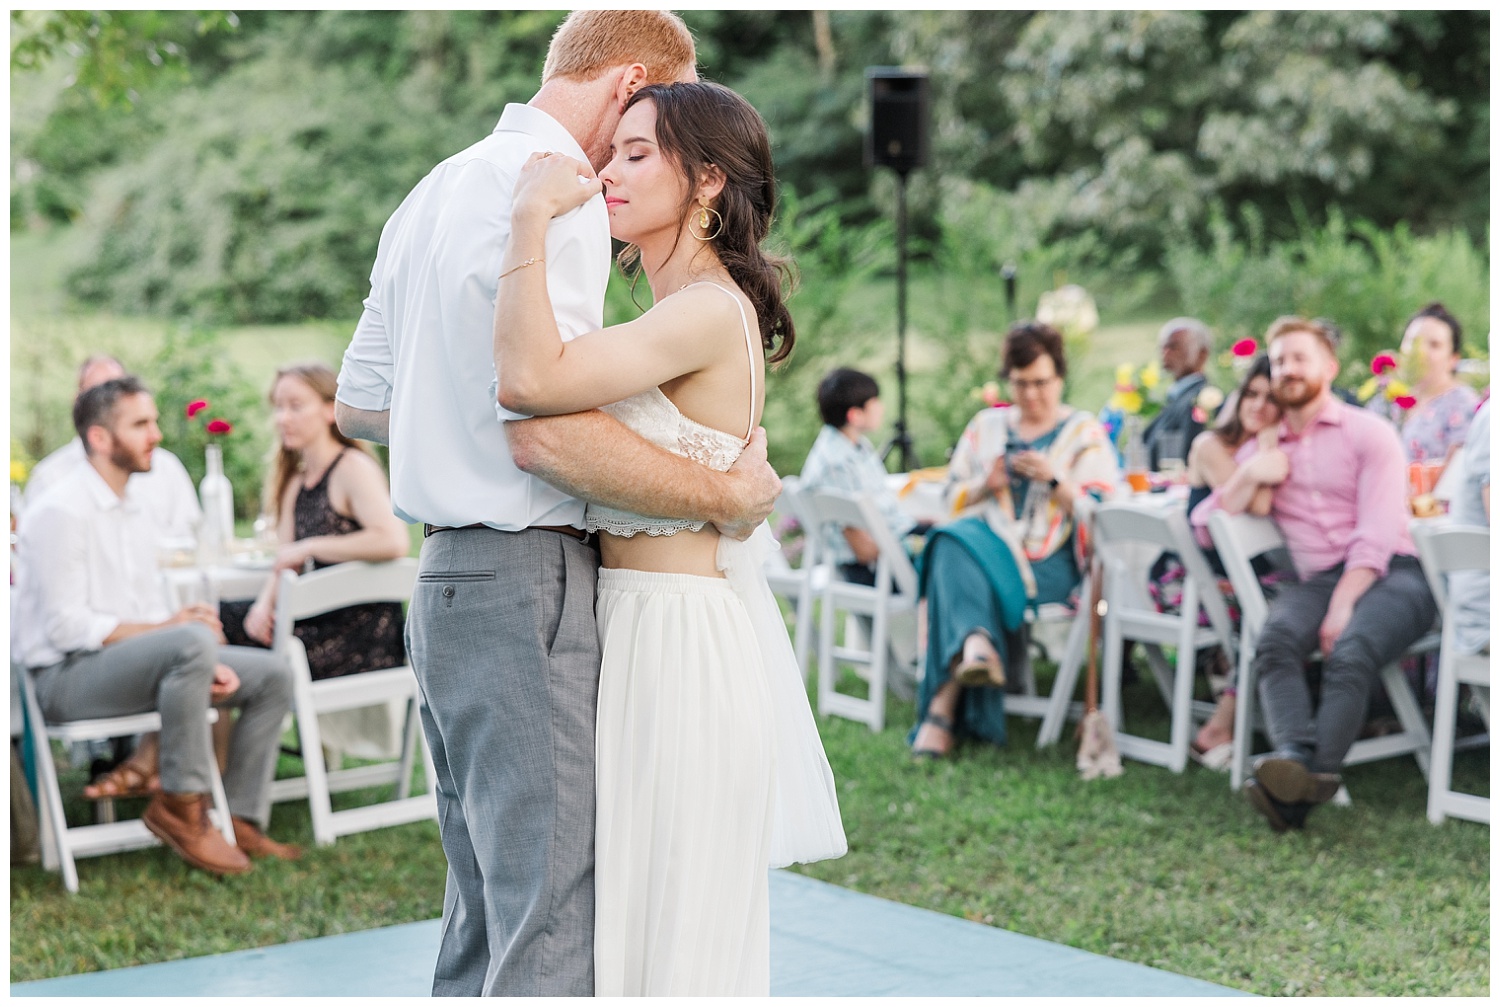 bride and groom's first dance at outdoor wedding reception